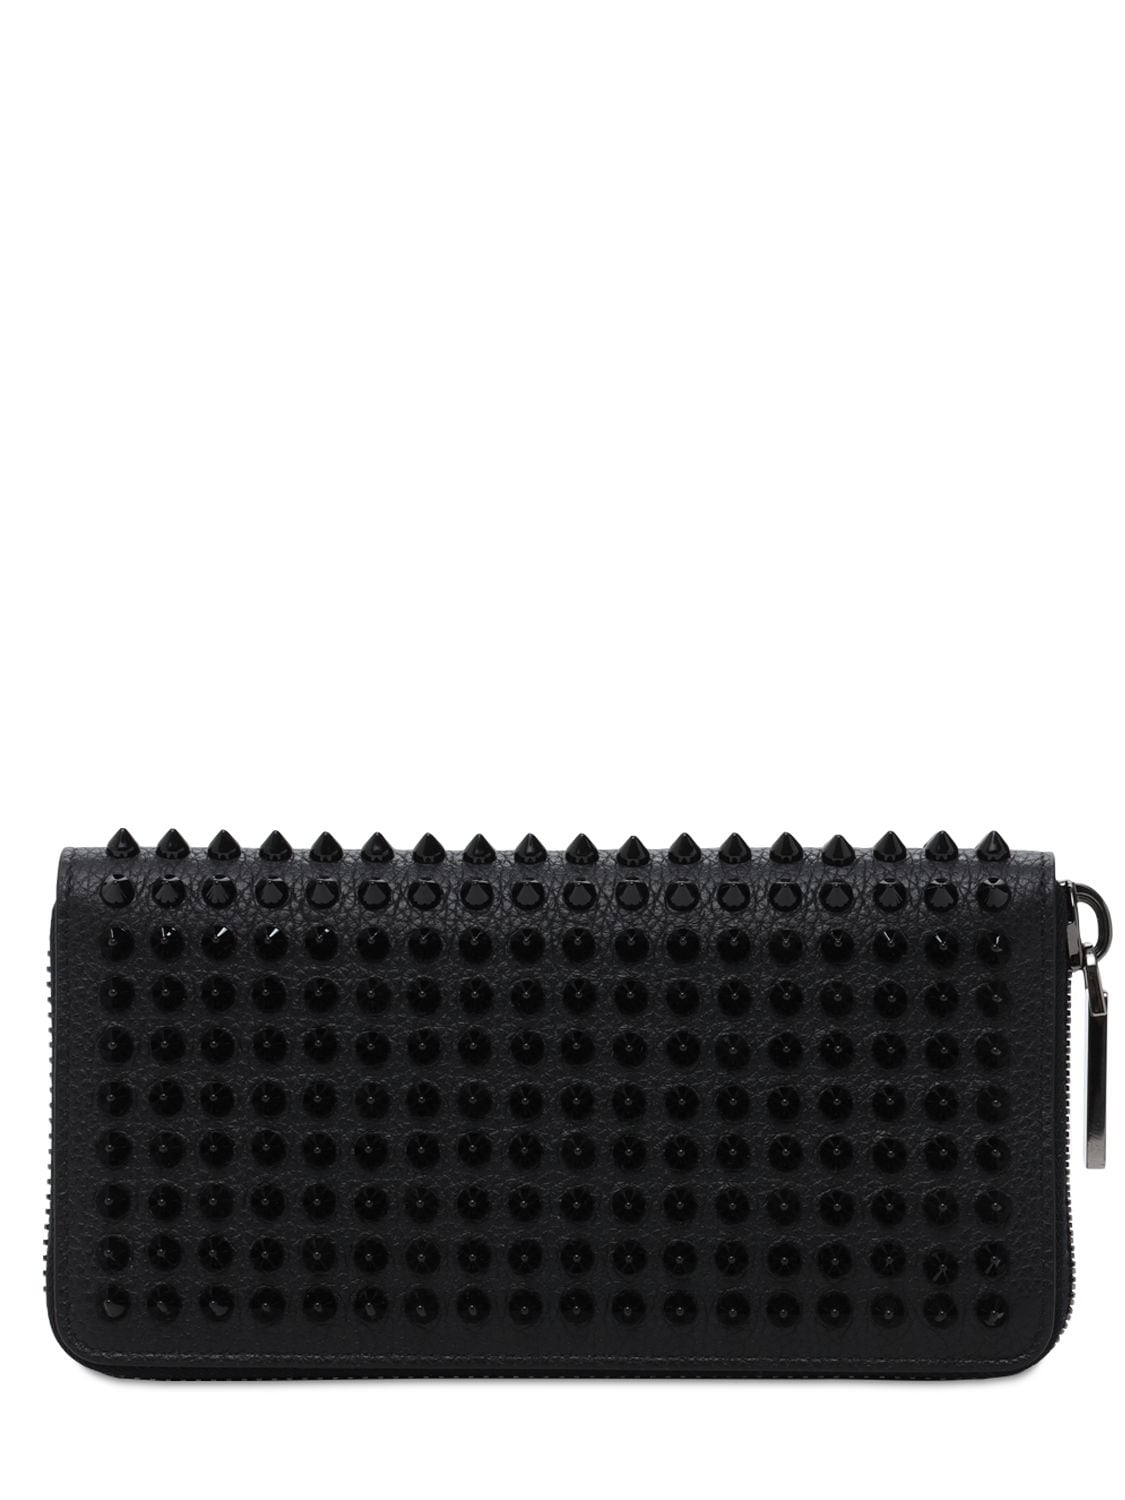 Image of Panettone Spiked Leather Zip Wallet